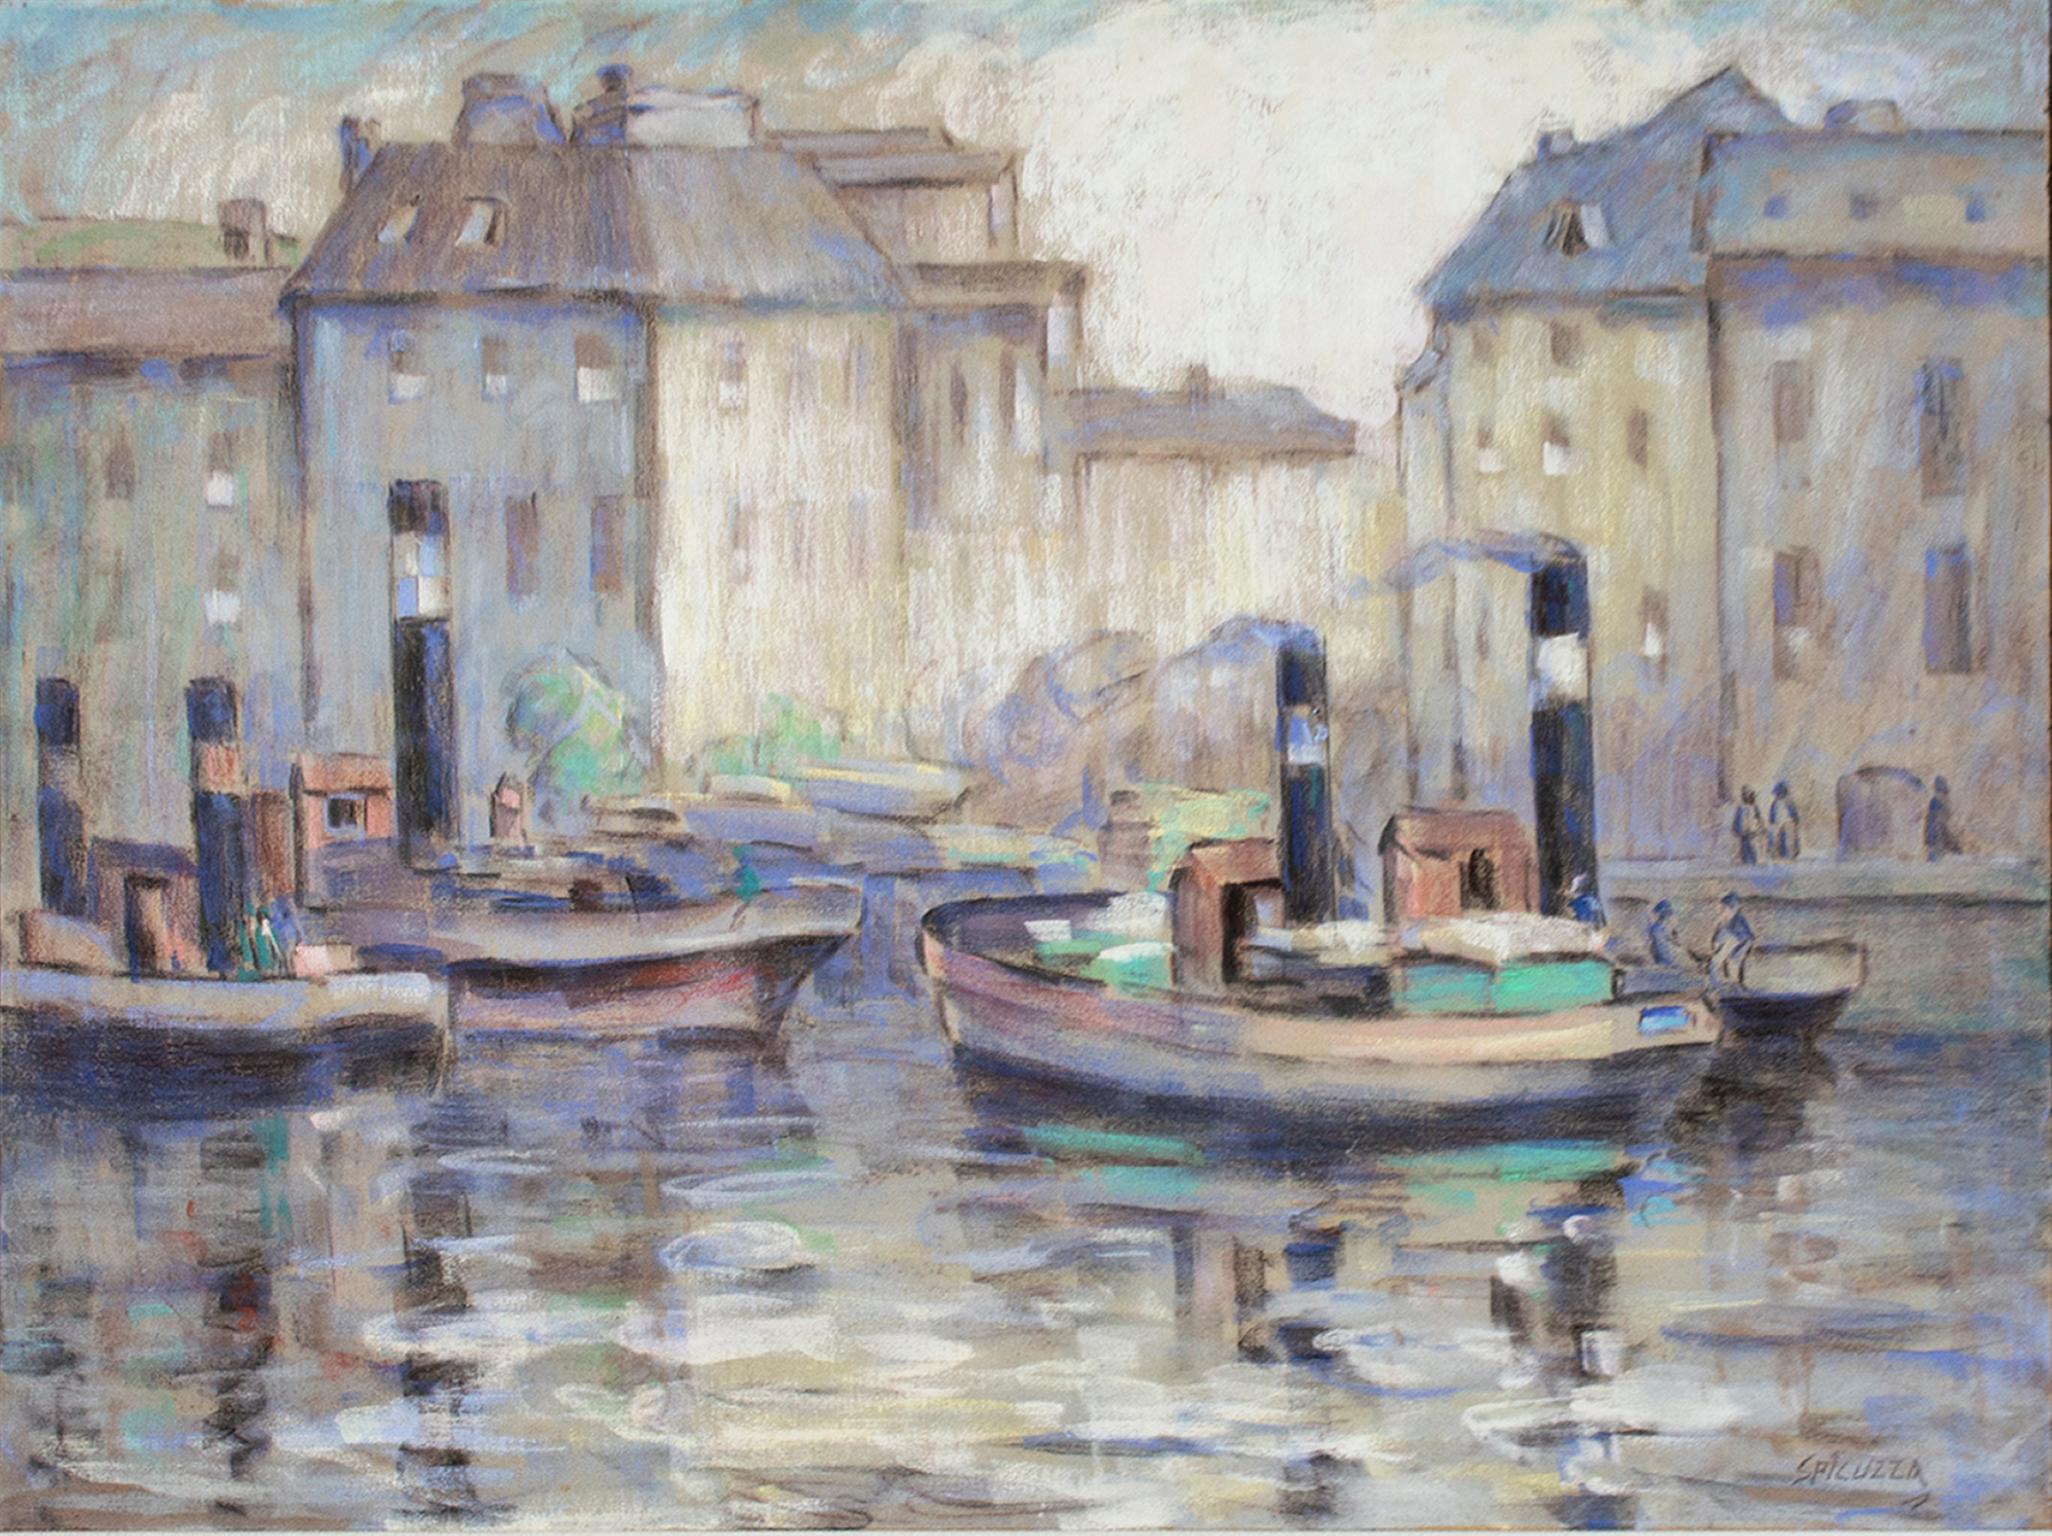 "Boats in Berlin Harbor, " Pastel on Cheesecloth by Francesco Spicuzza